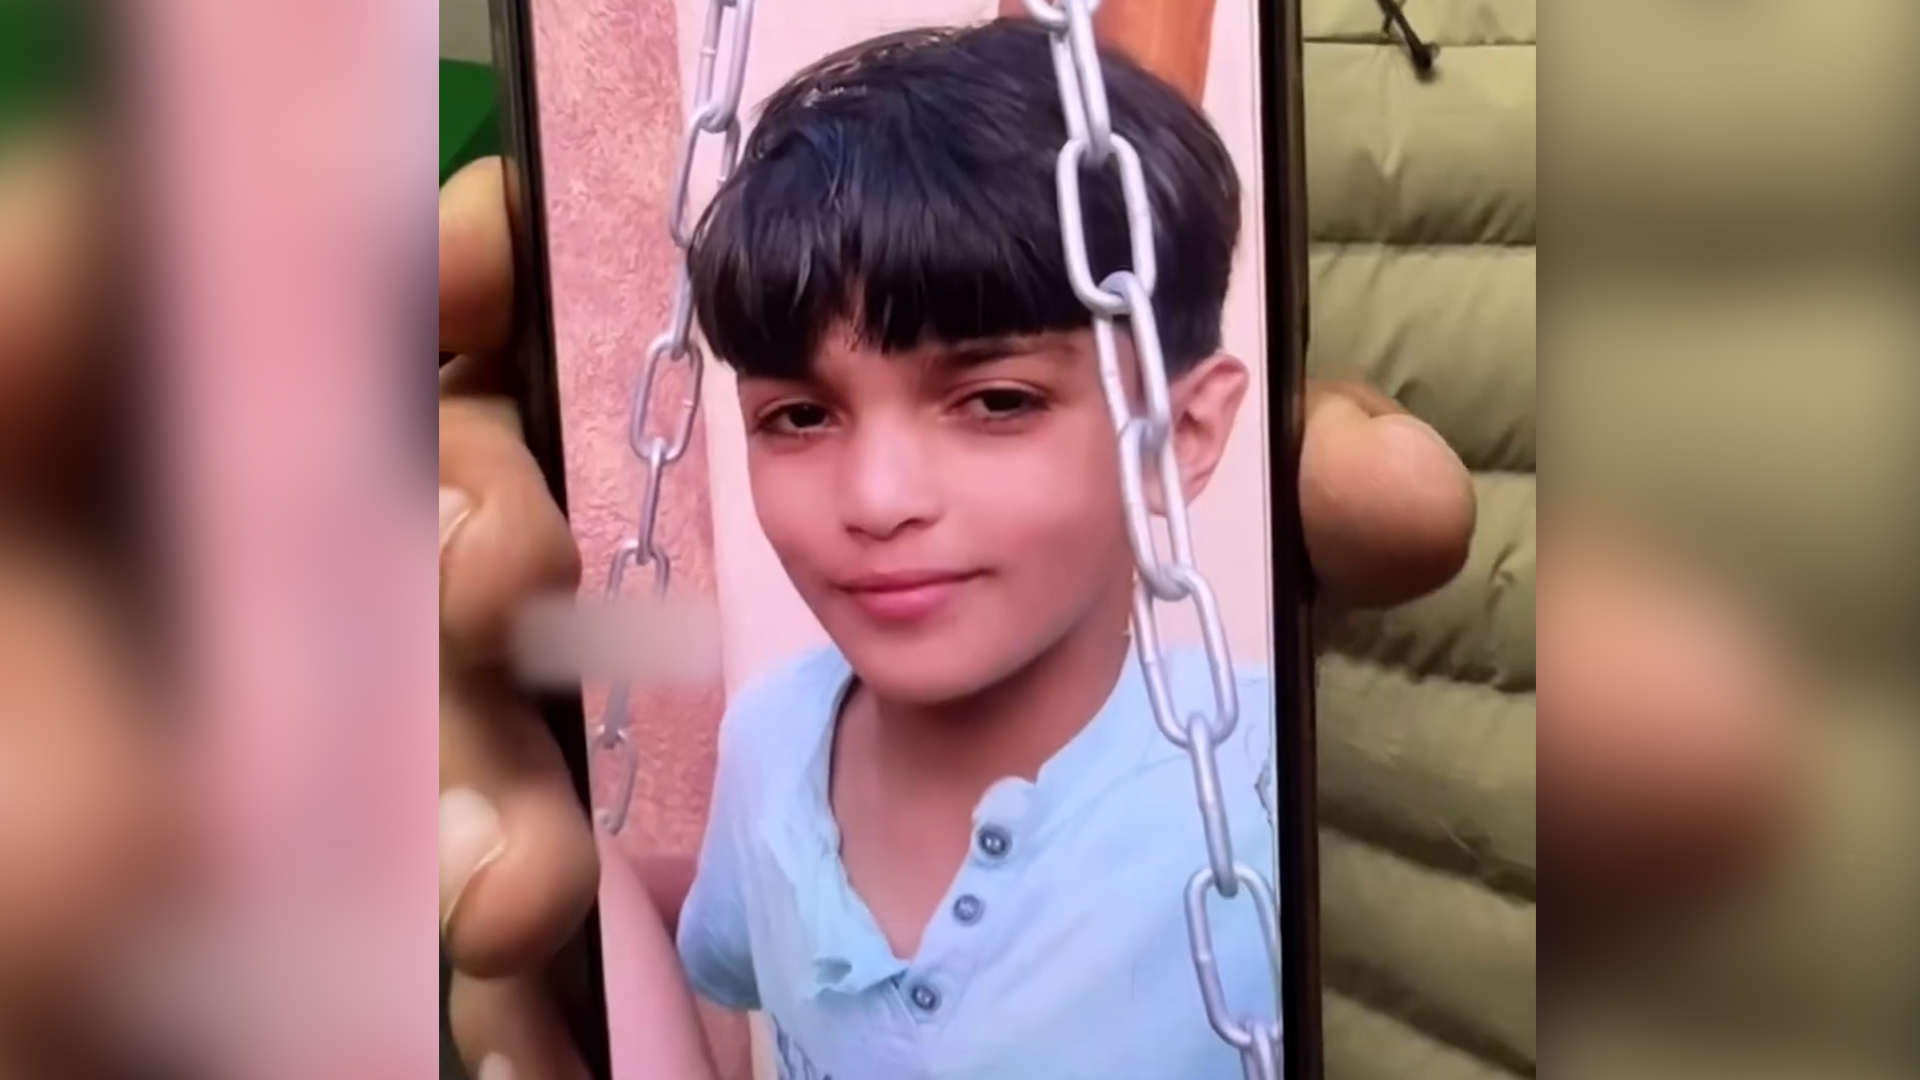 Injured Palestinian boy in Gaza no longer recognises his own face